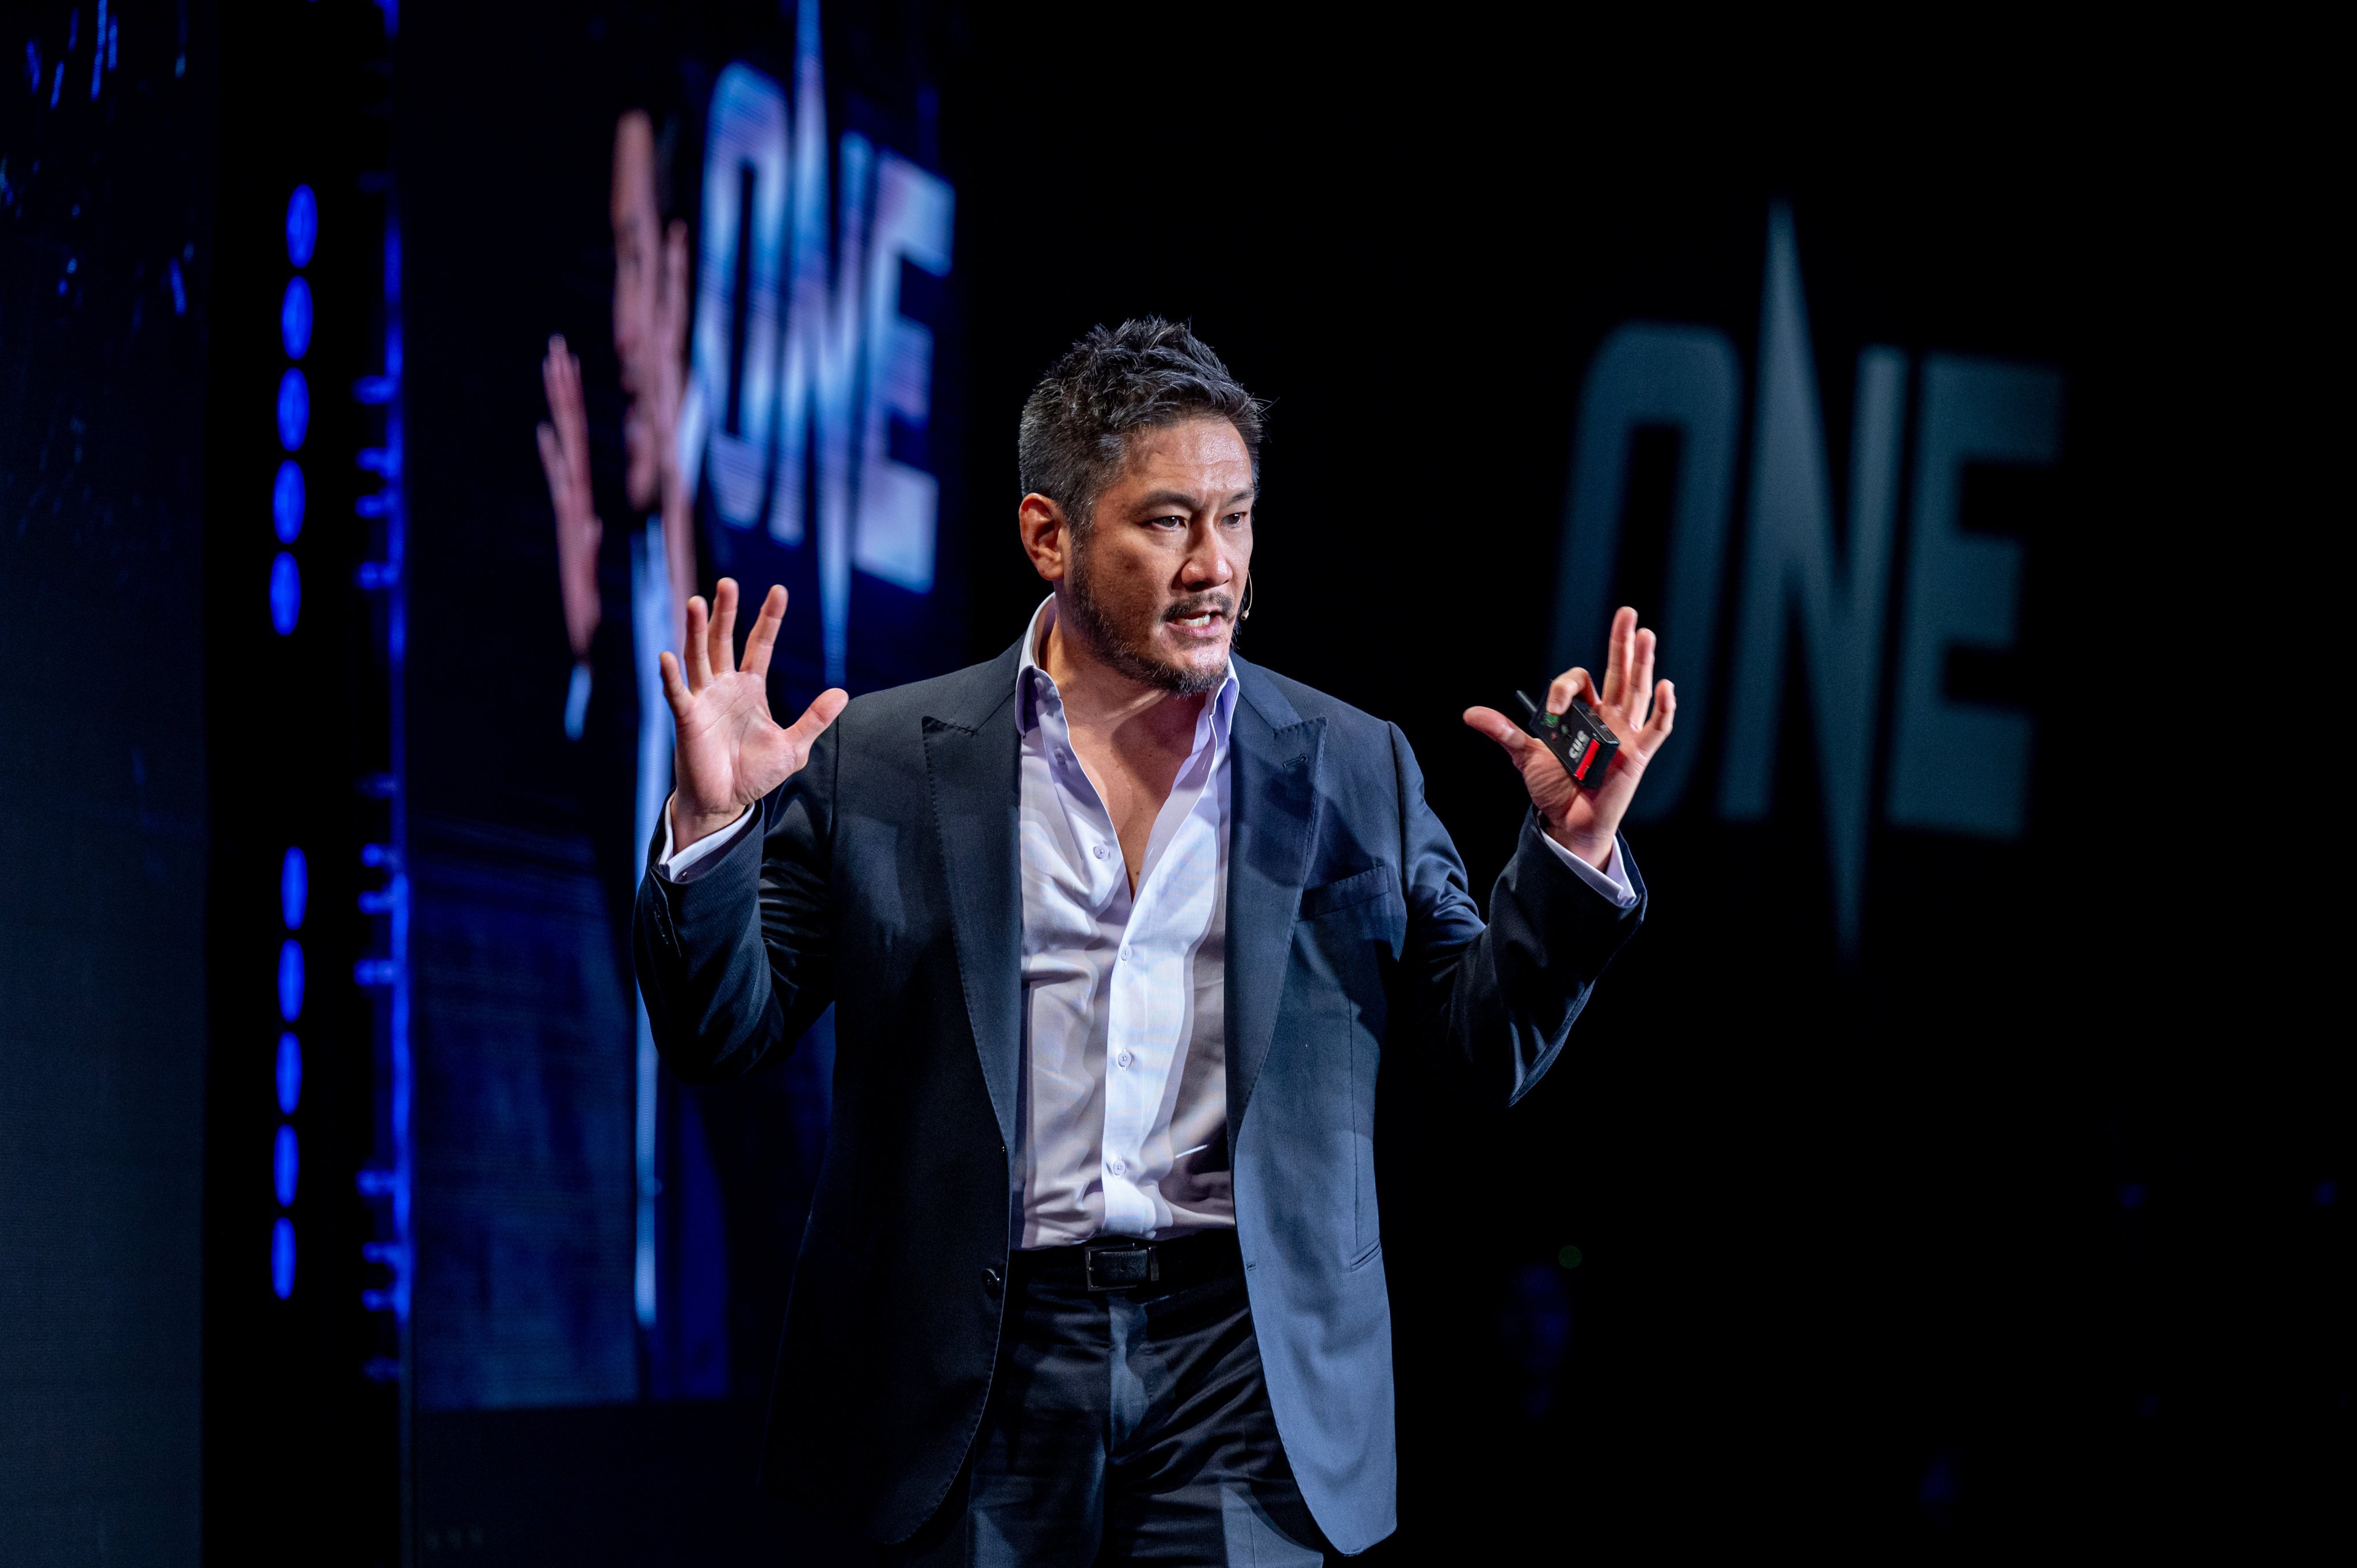 ONE CEO Chatri Sityodtong speaks at a B2B event in Bangkok. Photo: ONE Championship